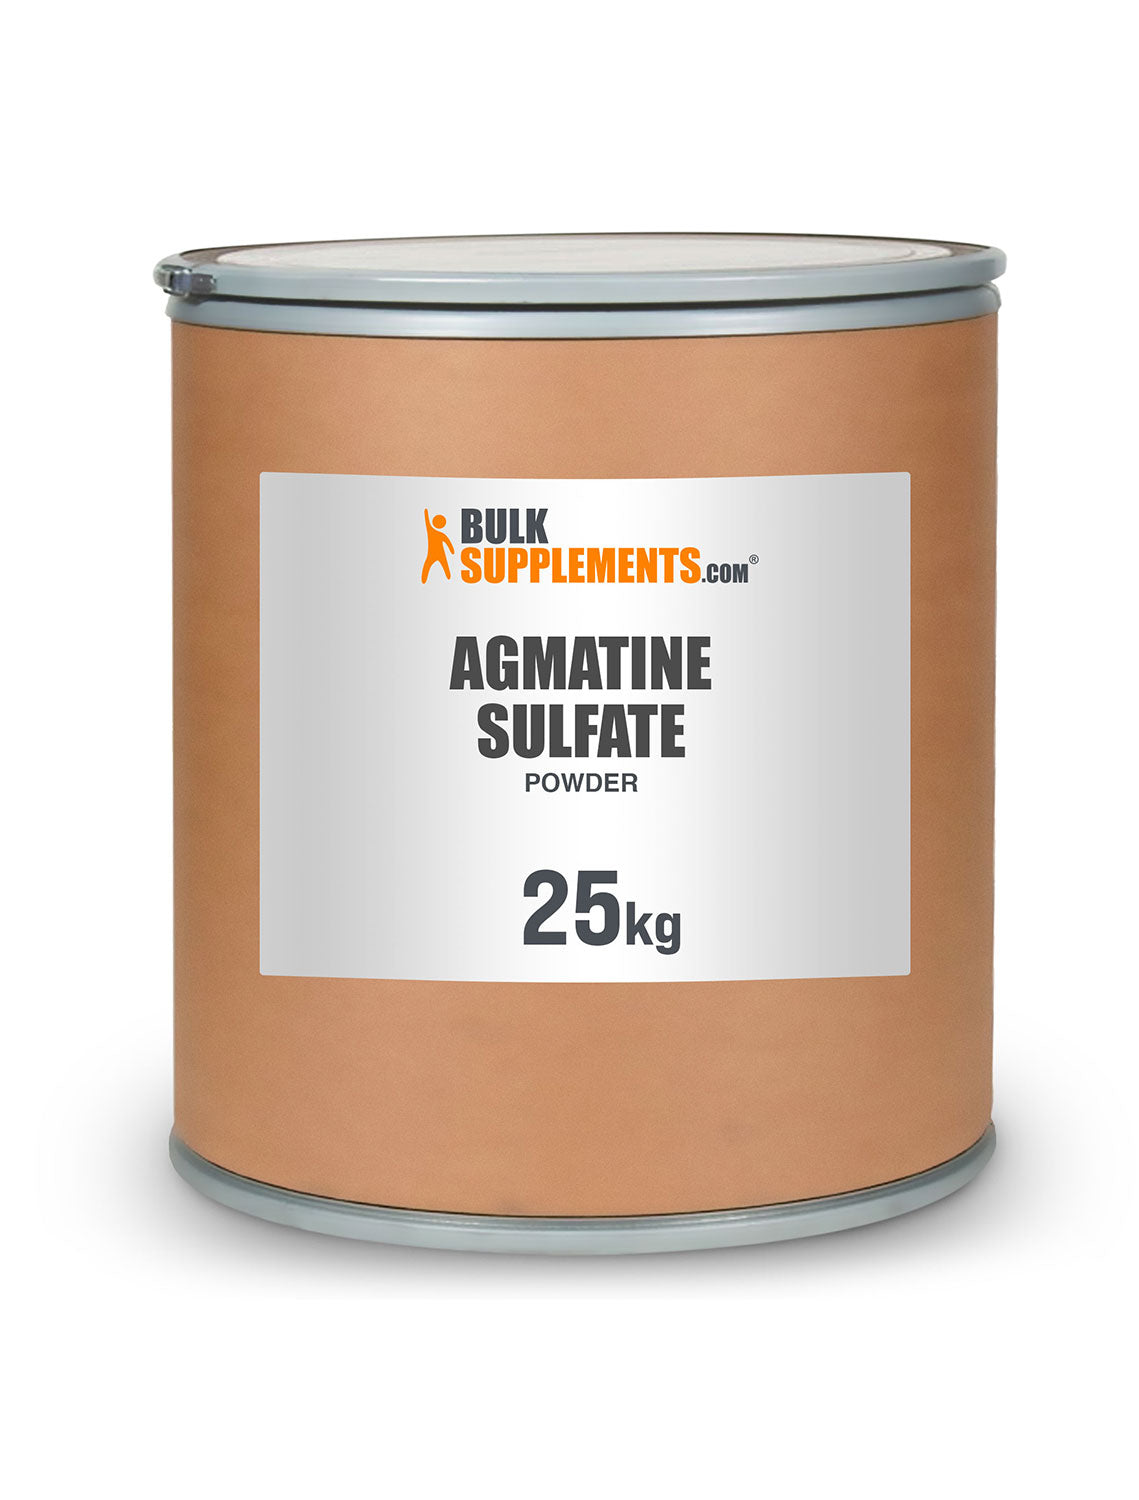 Agmatine Sulfate 25kg can